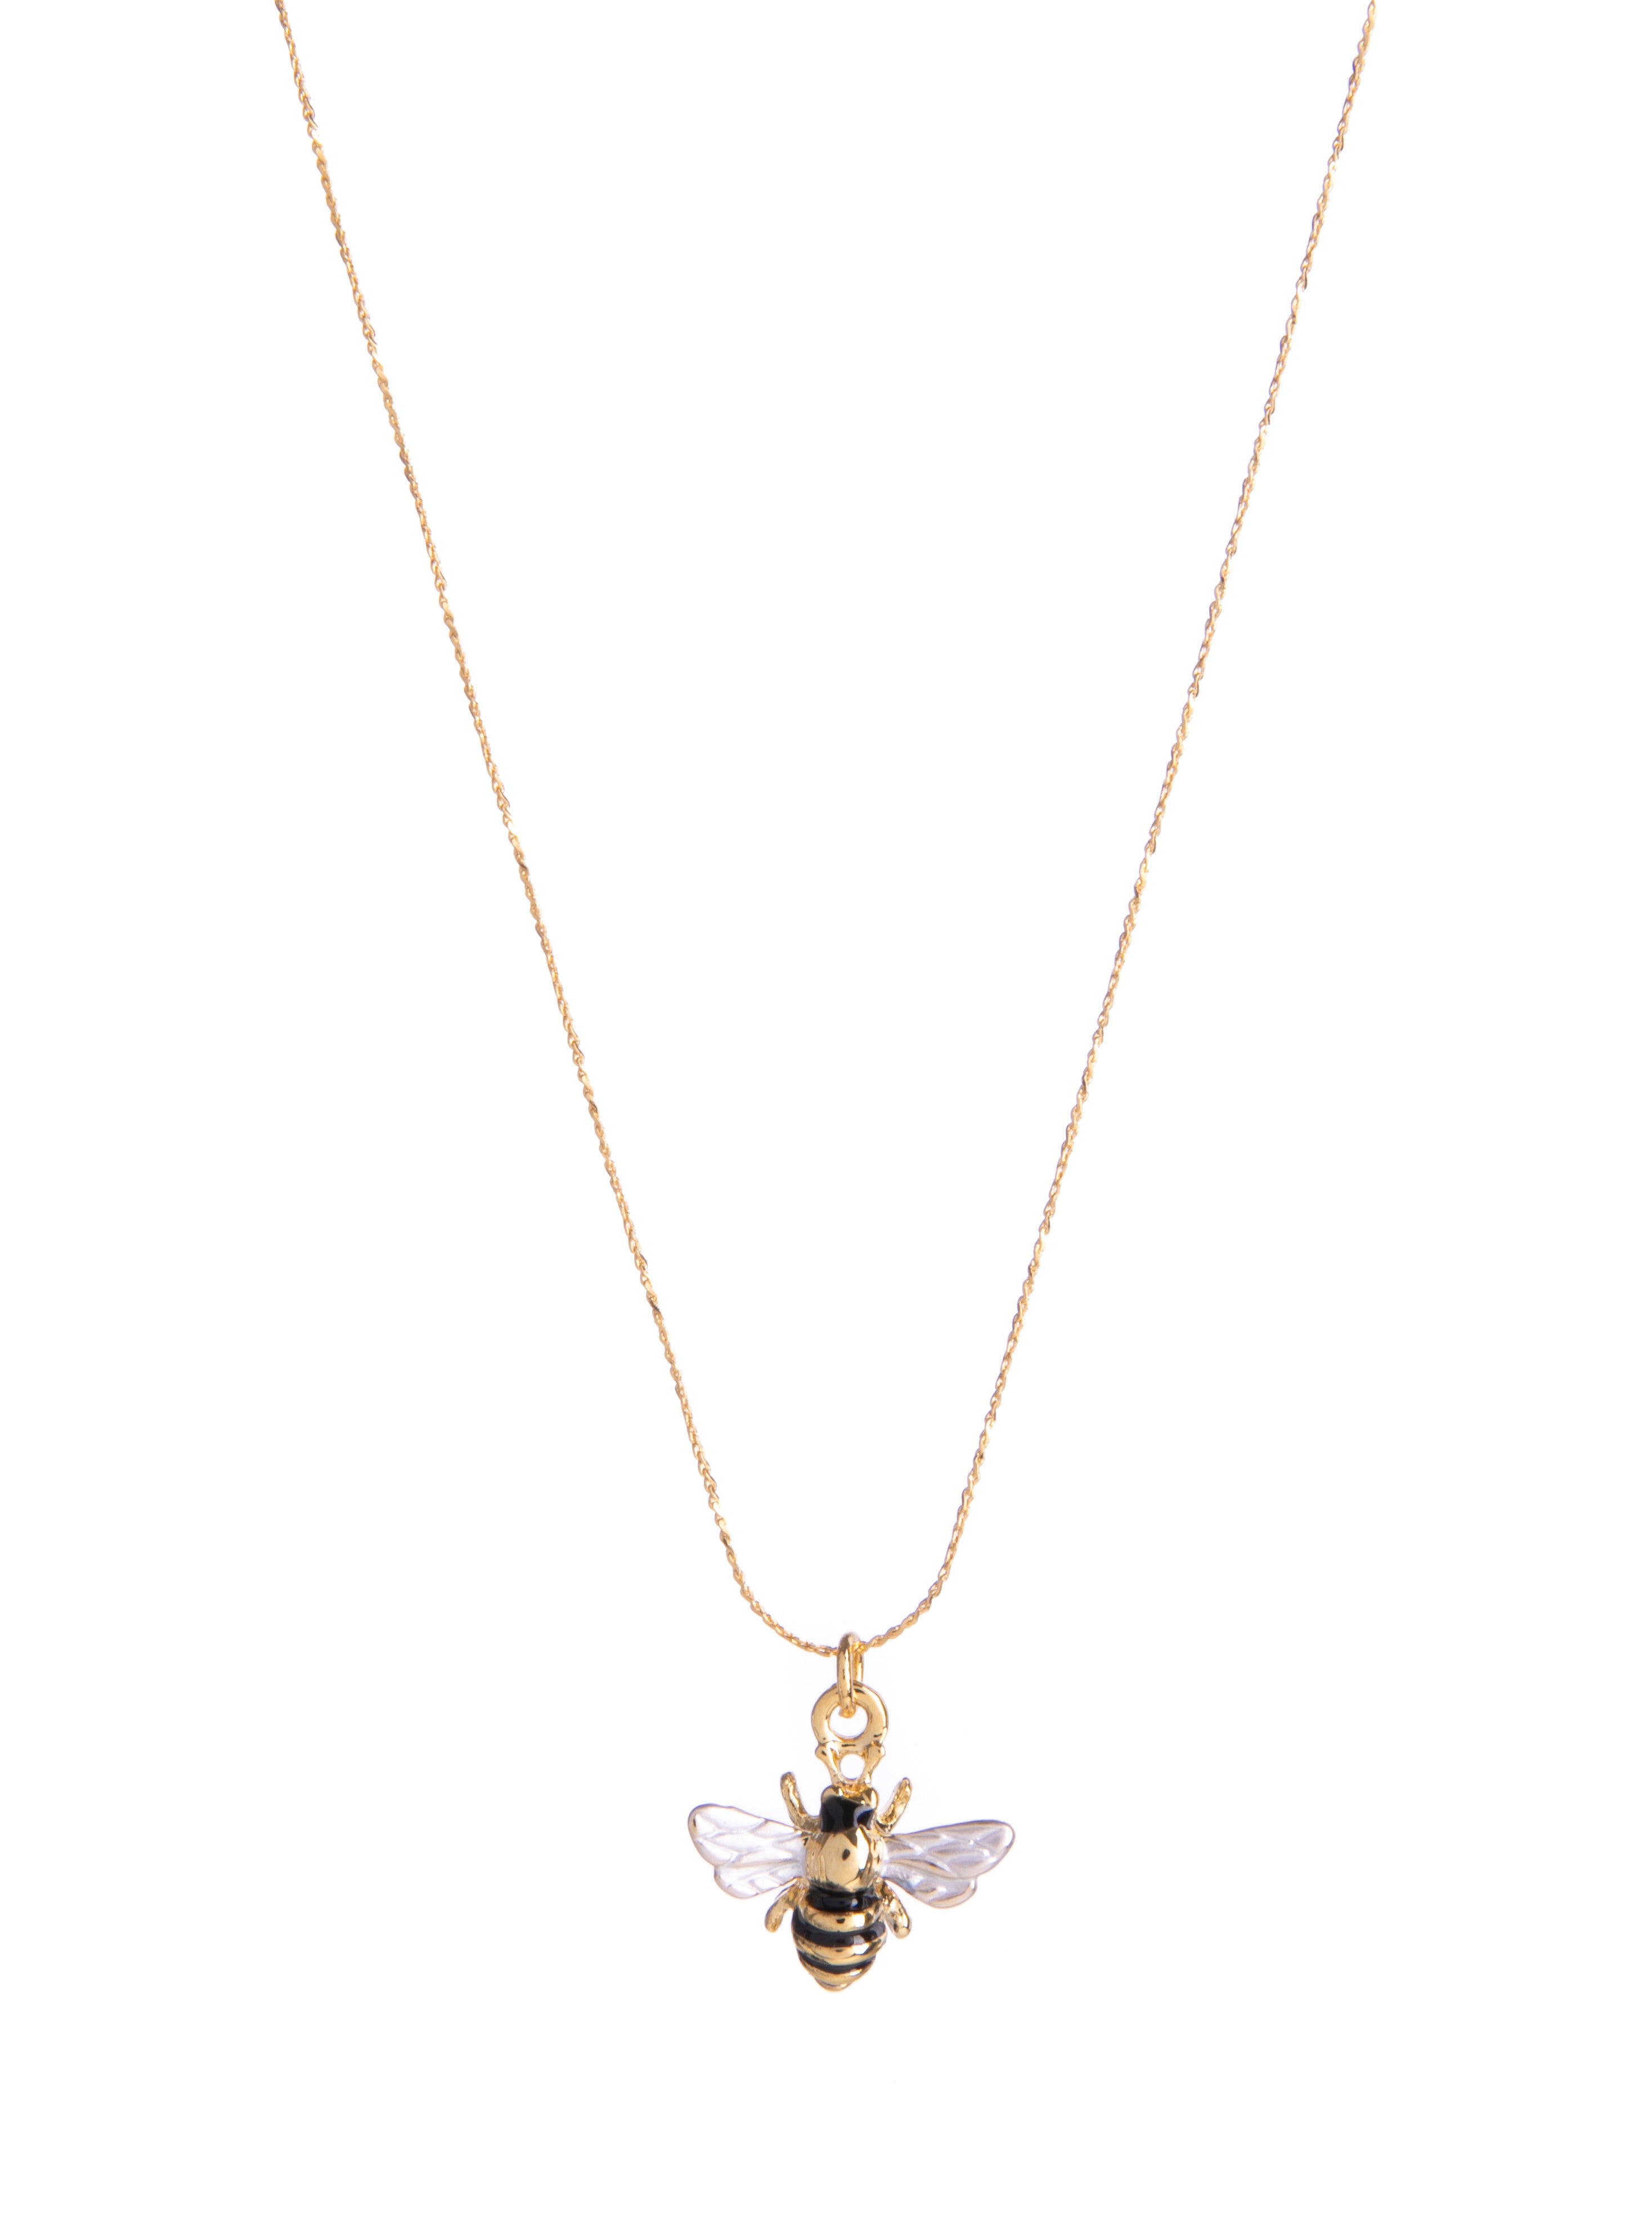 Crystal Bumble Bee Necklace – LAONATO